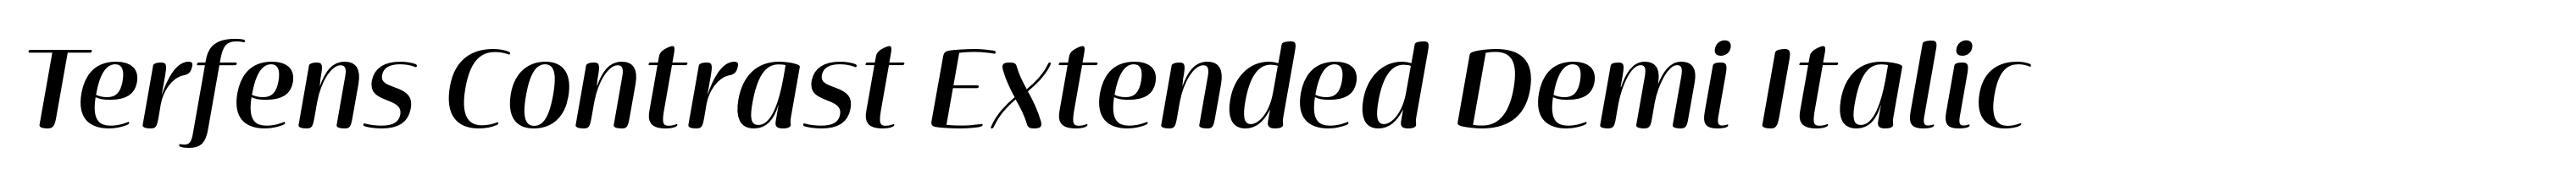 Terfens Contrast Extended Demi Italic